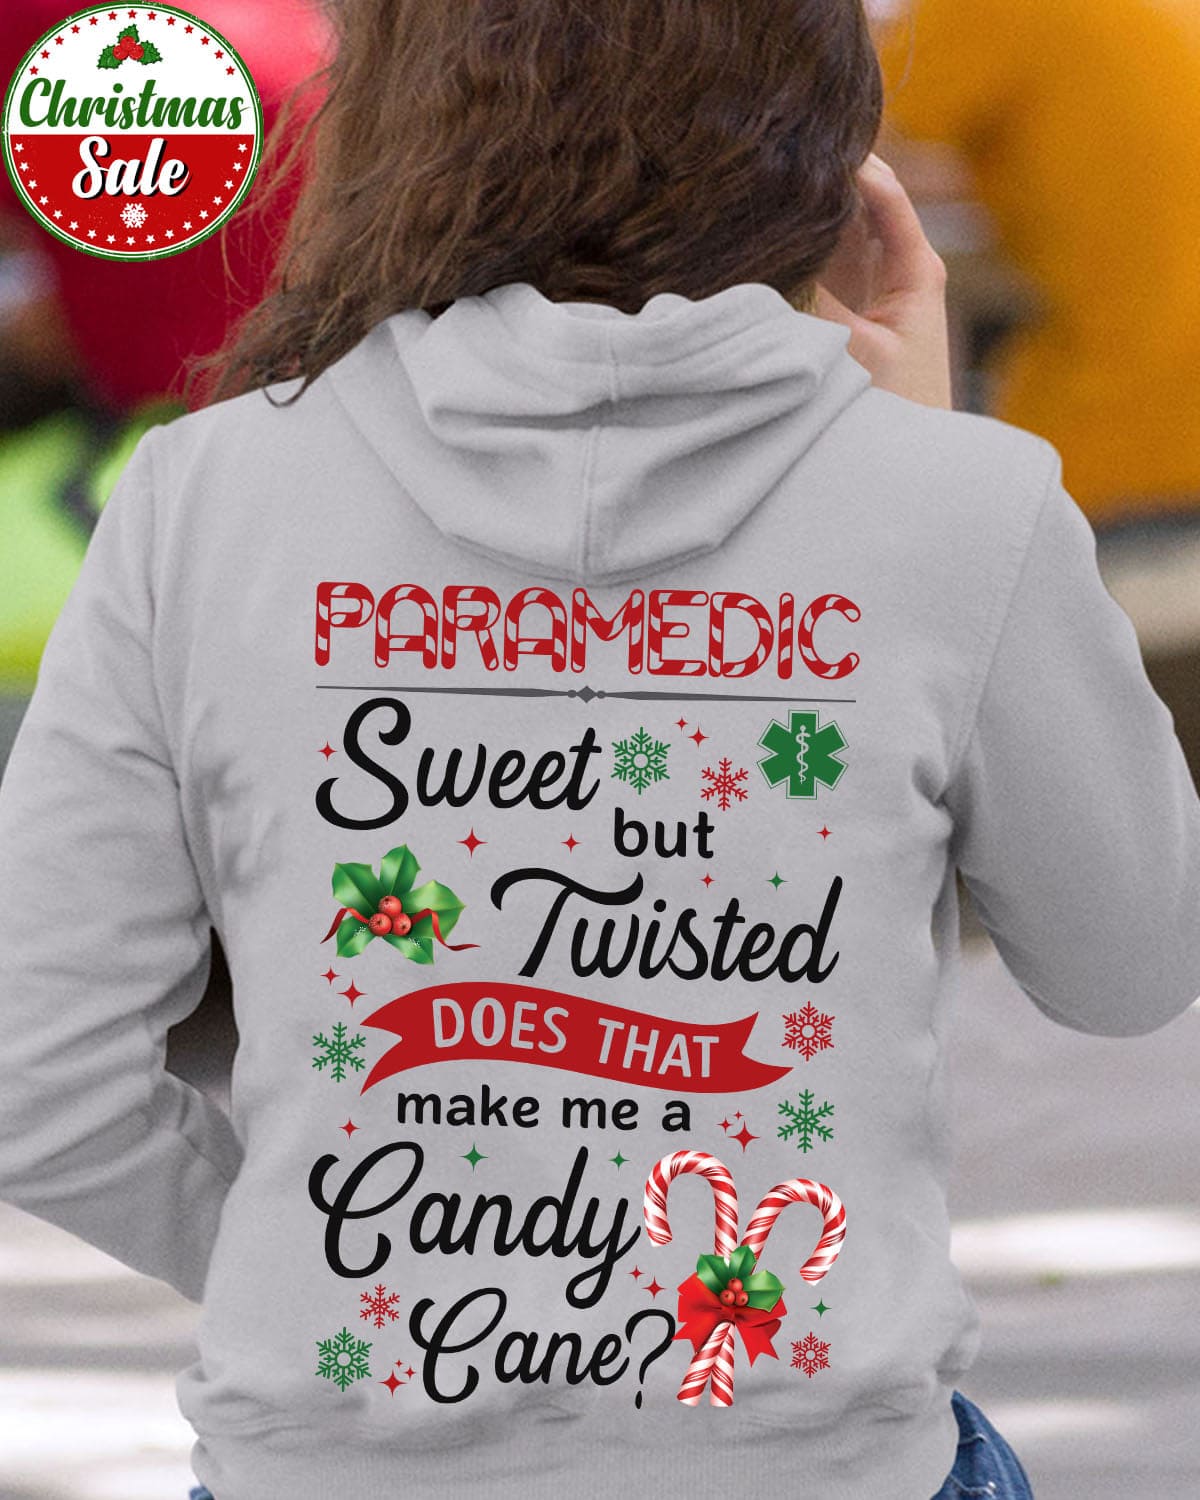 Paramedic The Job Ugly Christmas Sweater - Paramedic sweet but twisted does that make me a candy cane?